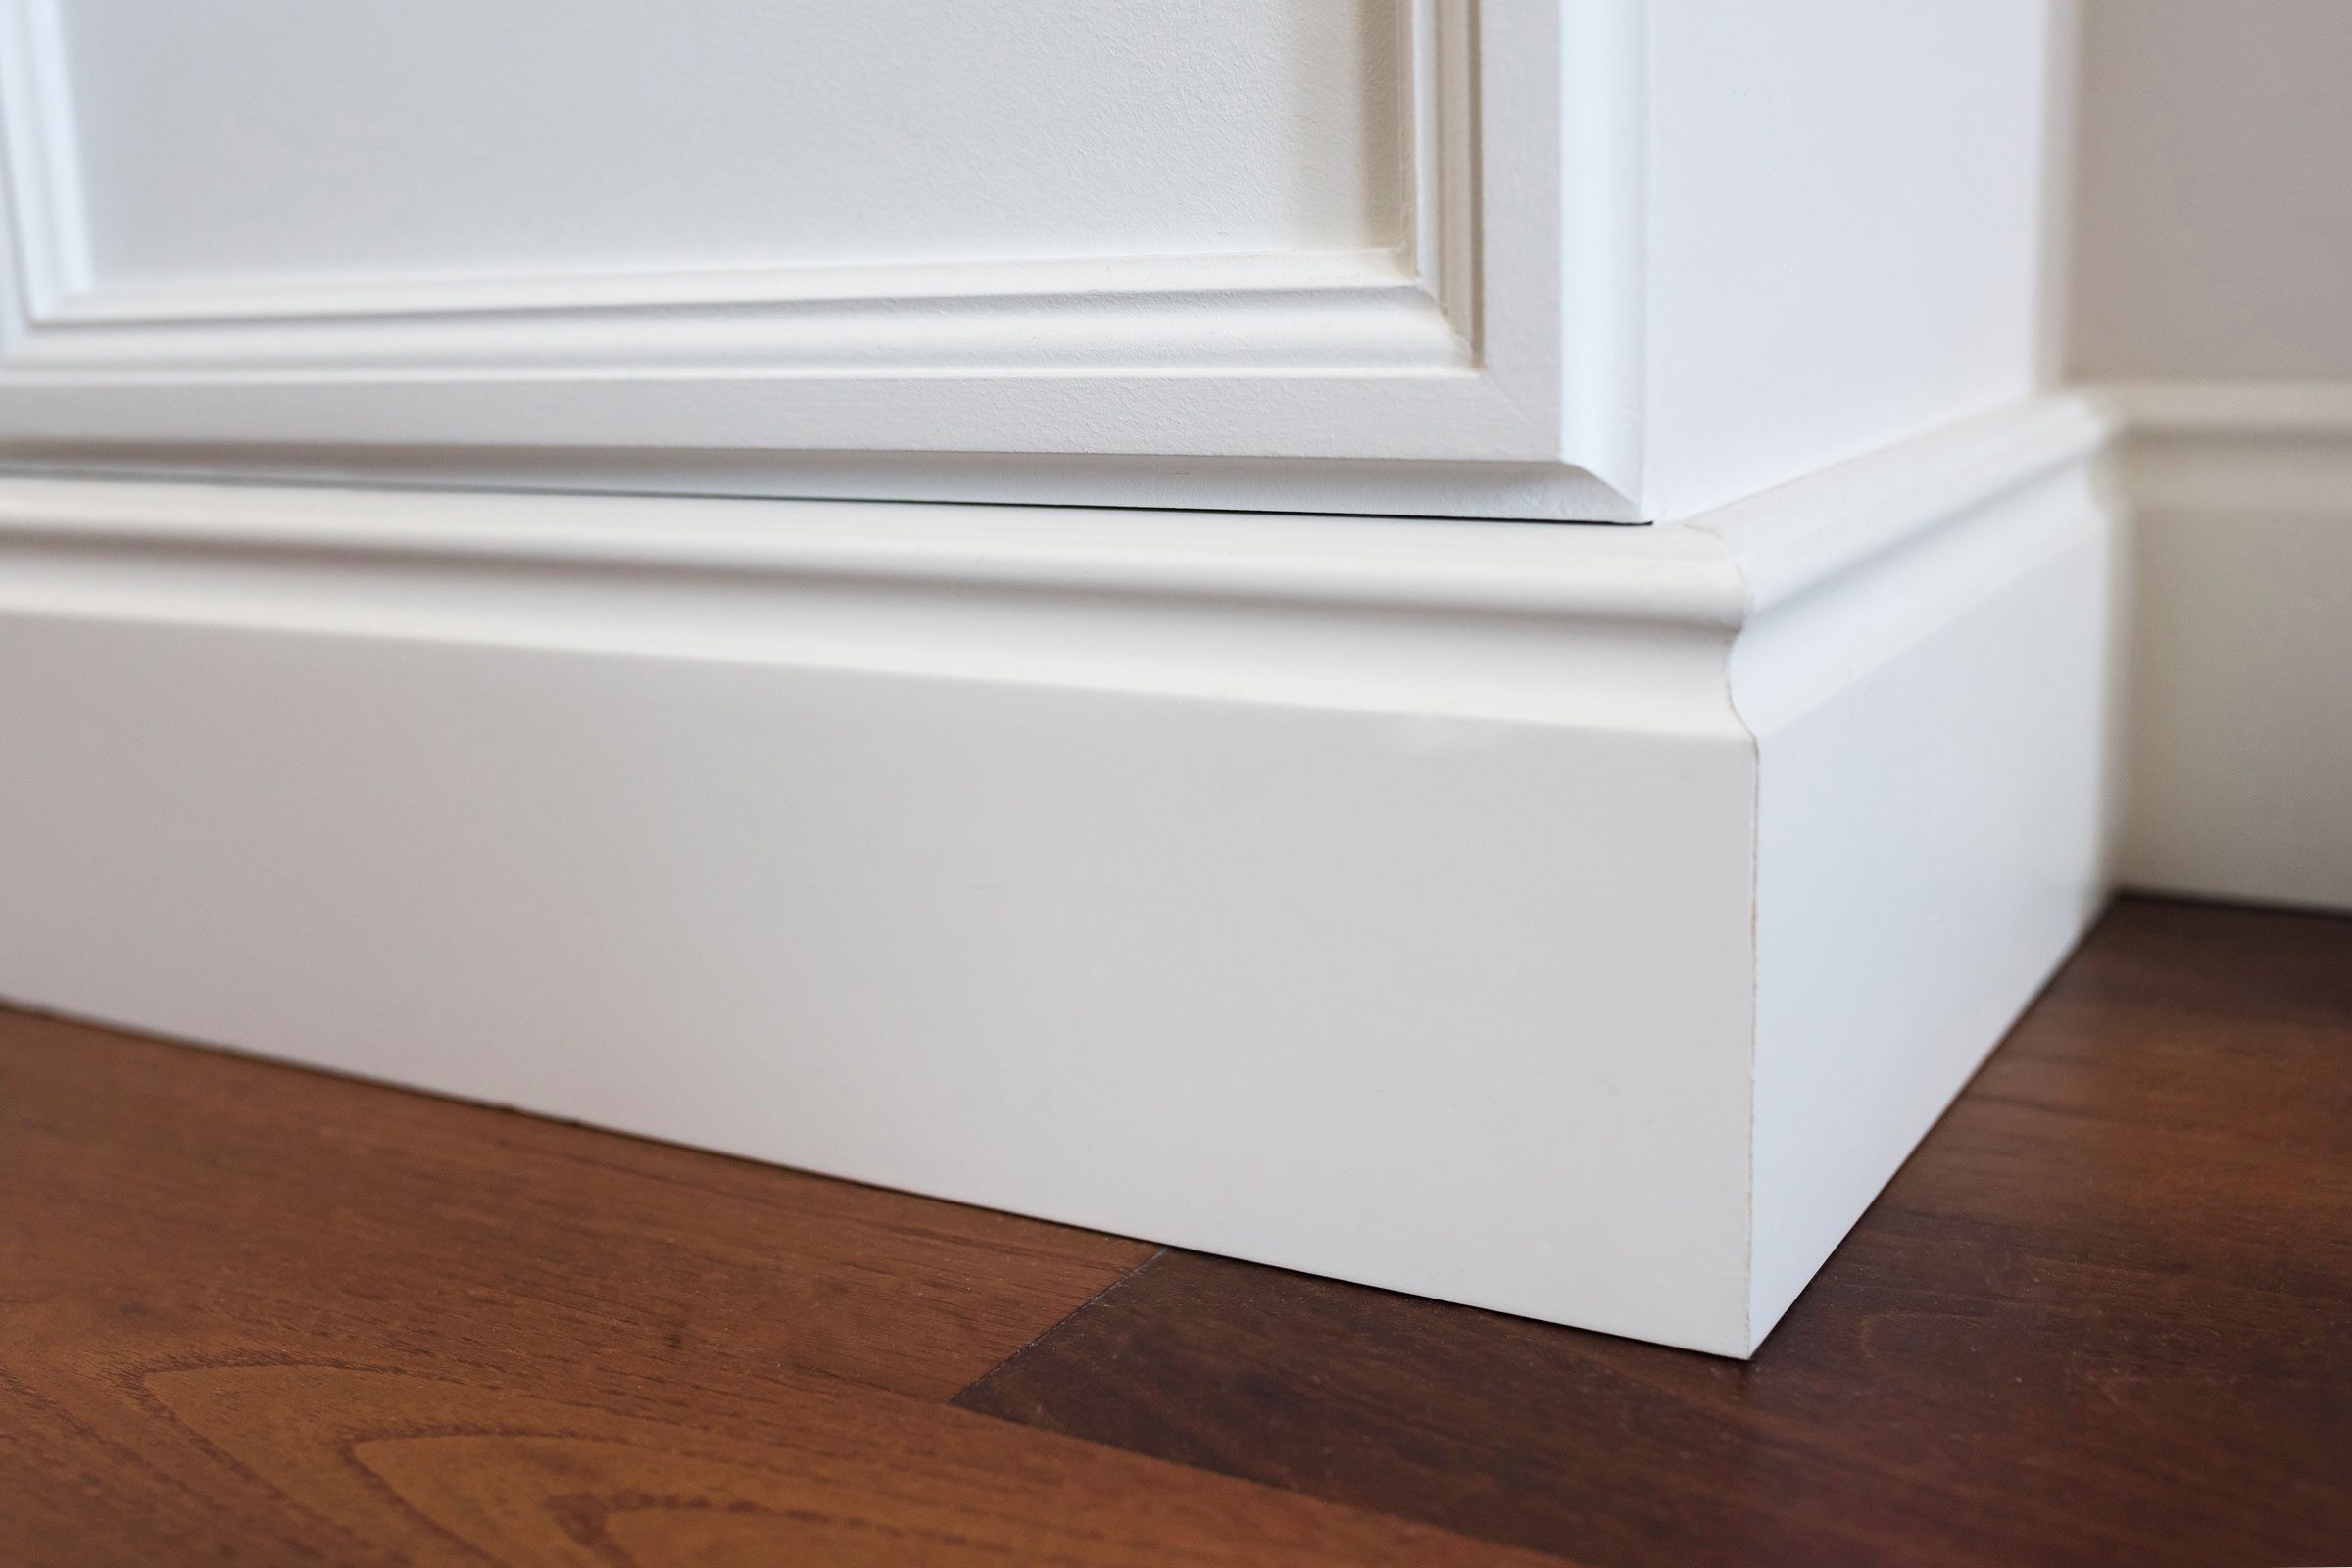 https://www.rd.com/wp-content/uploads/2022/03/how-to-clean-baseboards-GettyImages-1190699955-MLedit.jpg?fit=700%2C1024